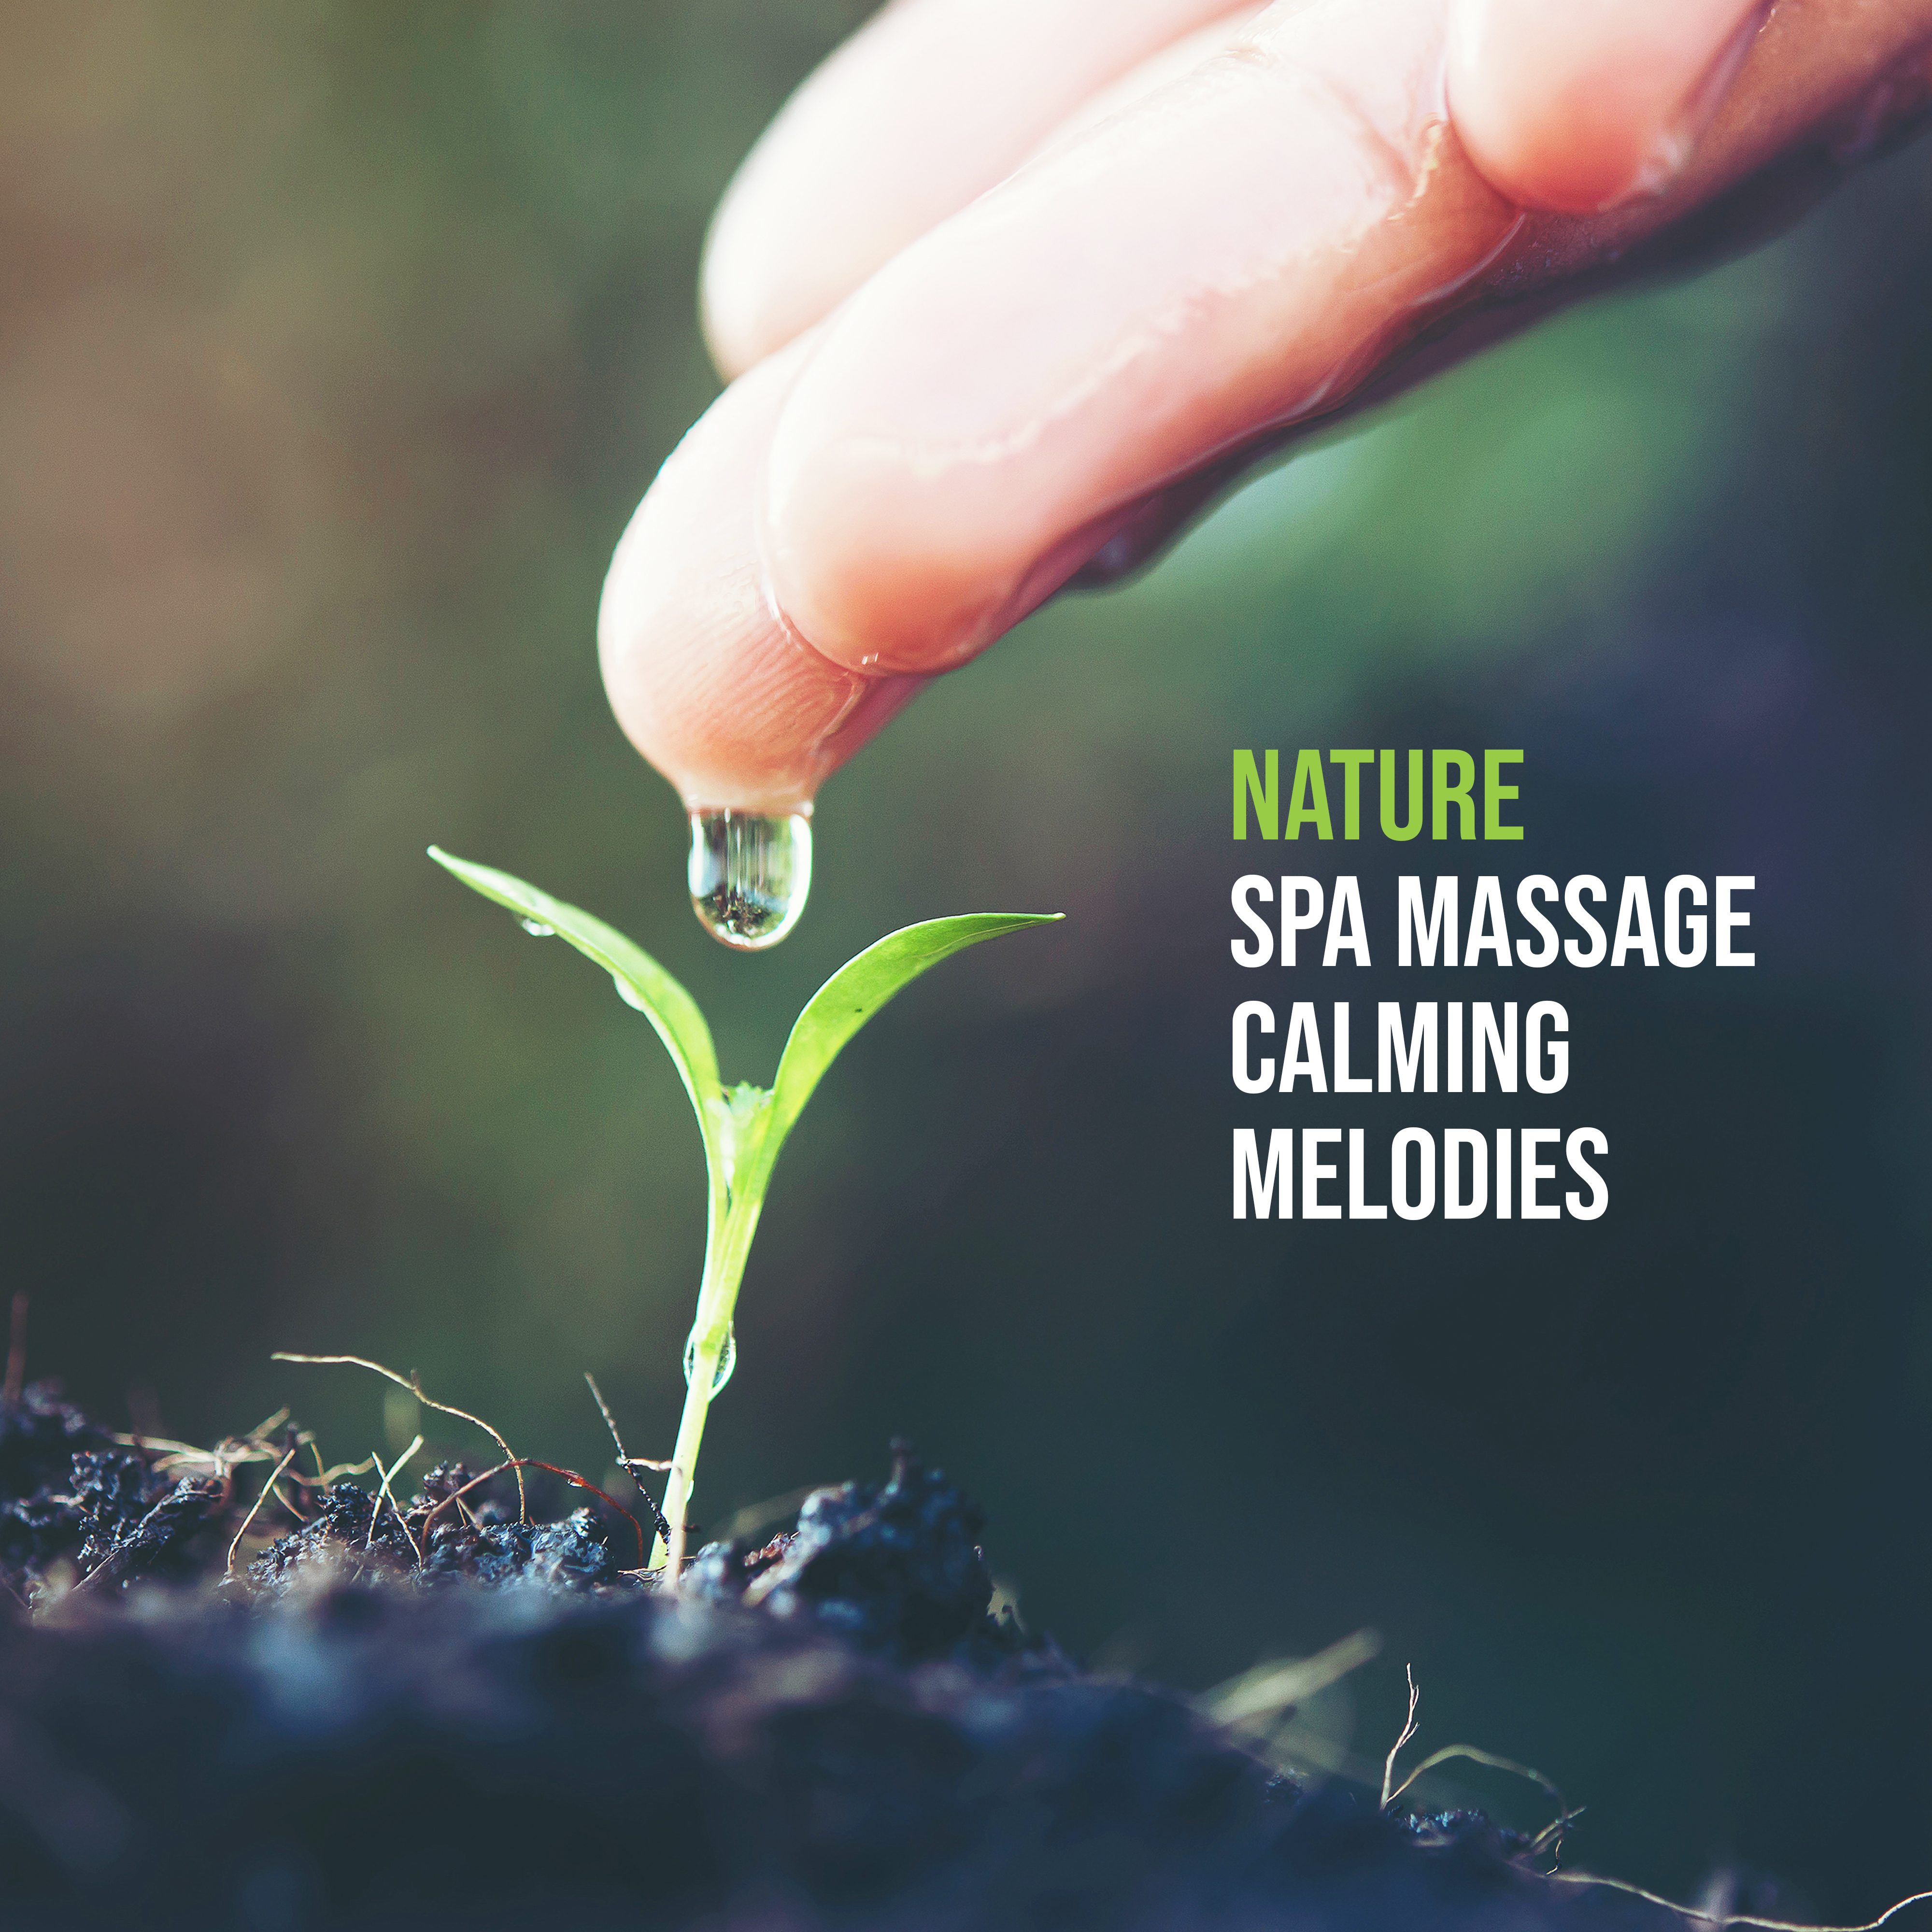 Nature Spa Massage Calming Melodies – New Age Spa & Wellness Sounds of Nature, Bird's Songs, Slow Relaxing Music